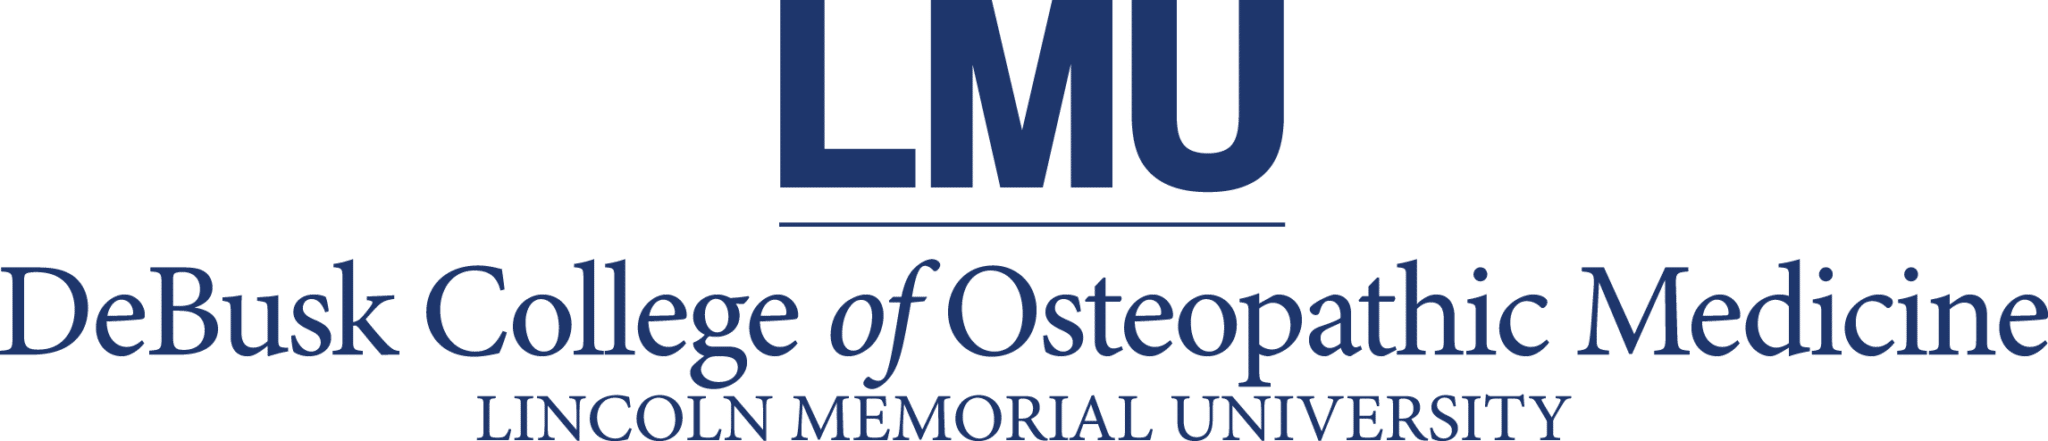 Logo reading LMU DeBusk College of Osteopathic Medicine Lincoln Memorial University